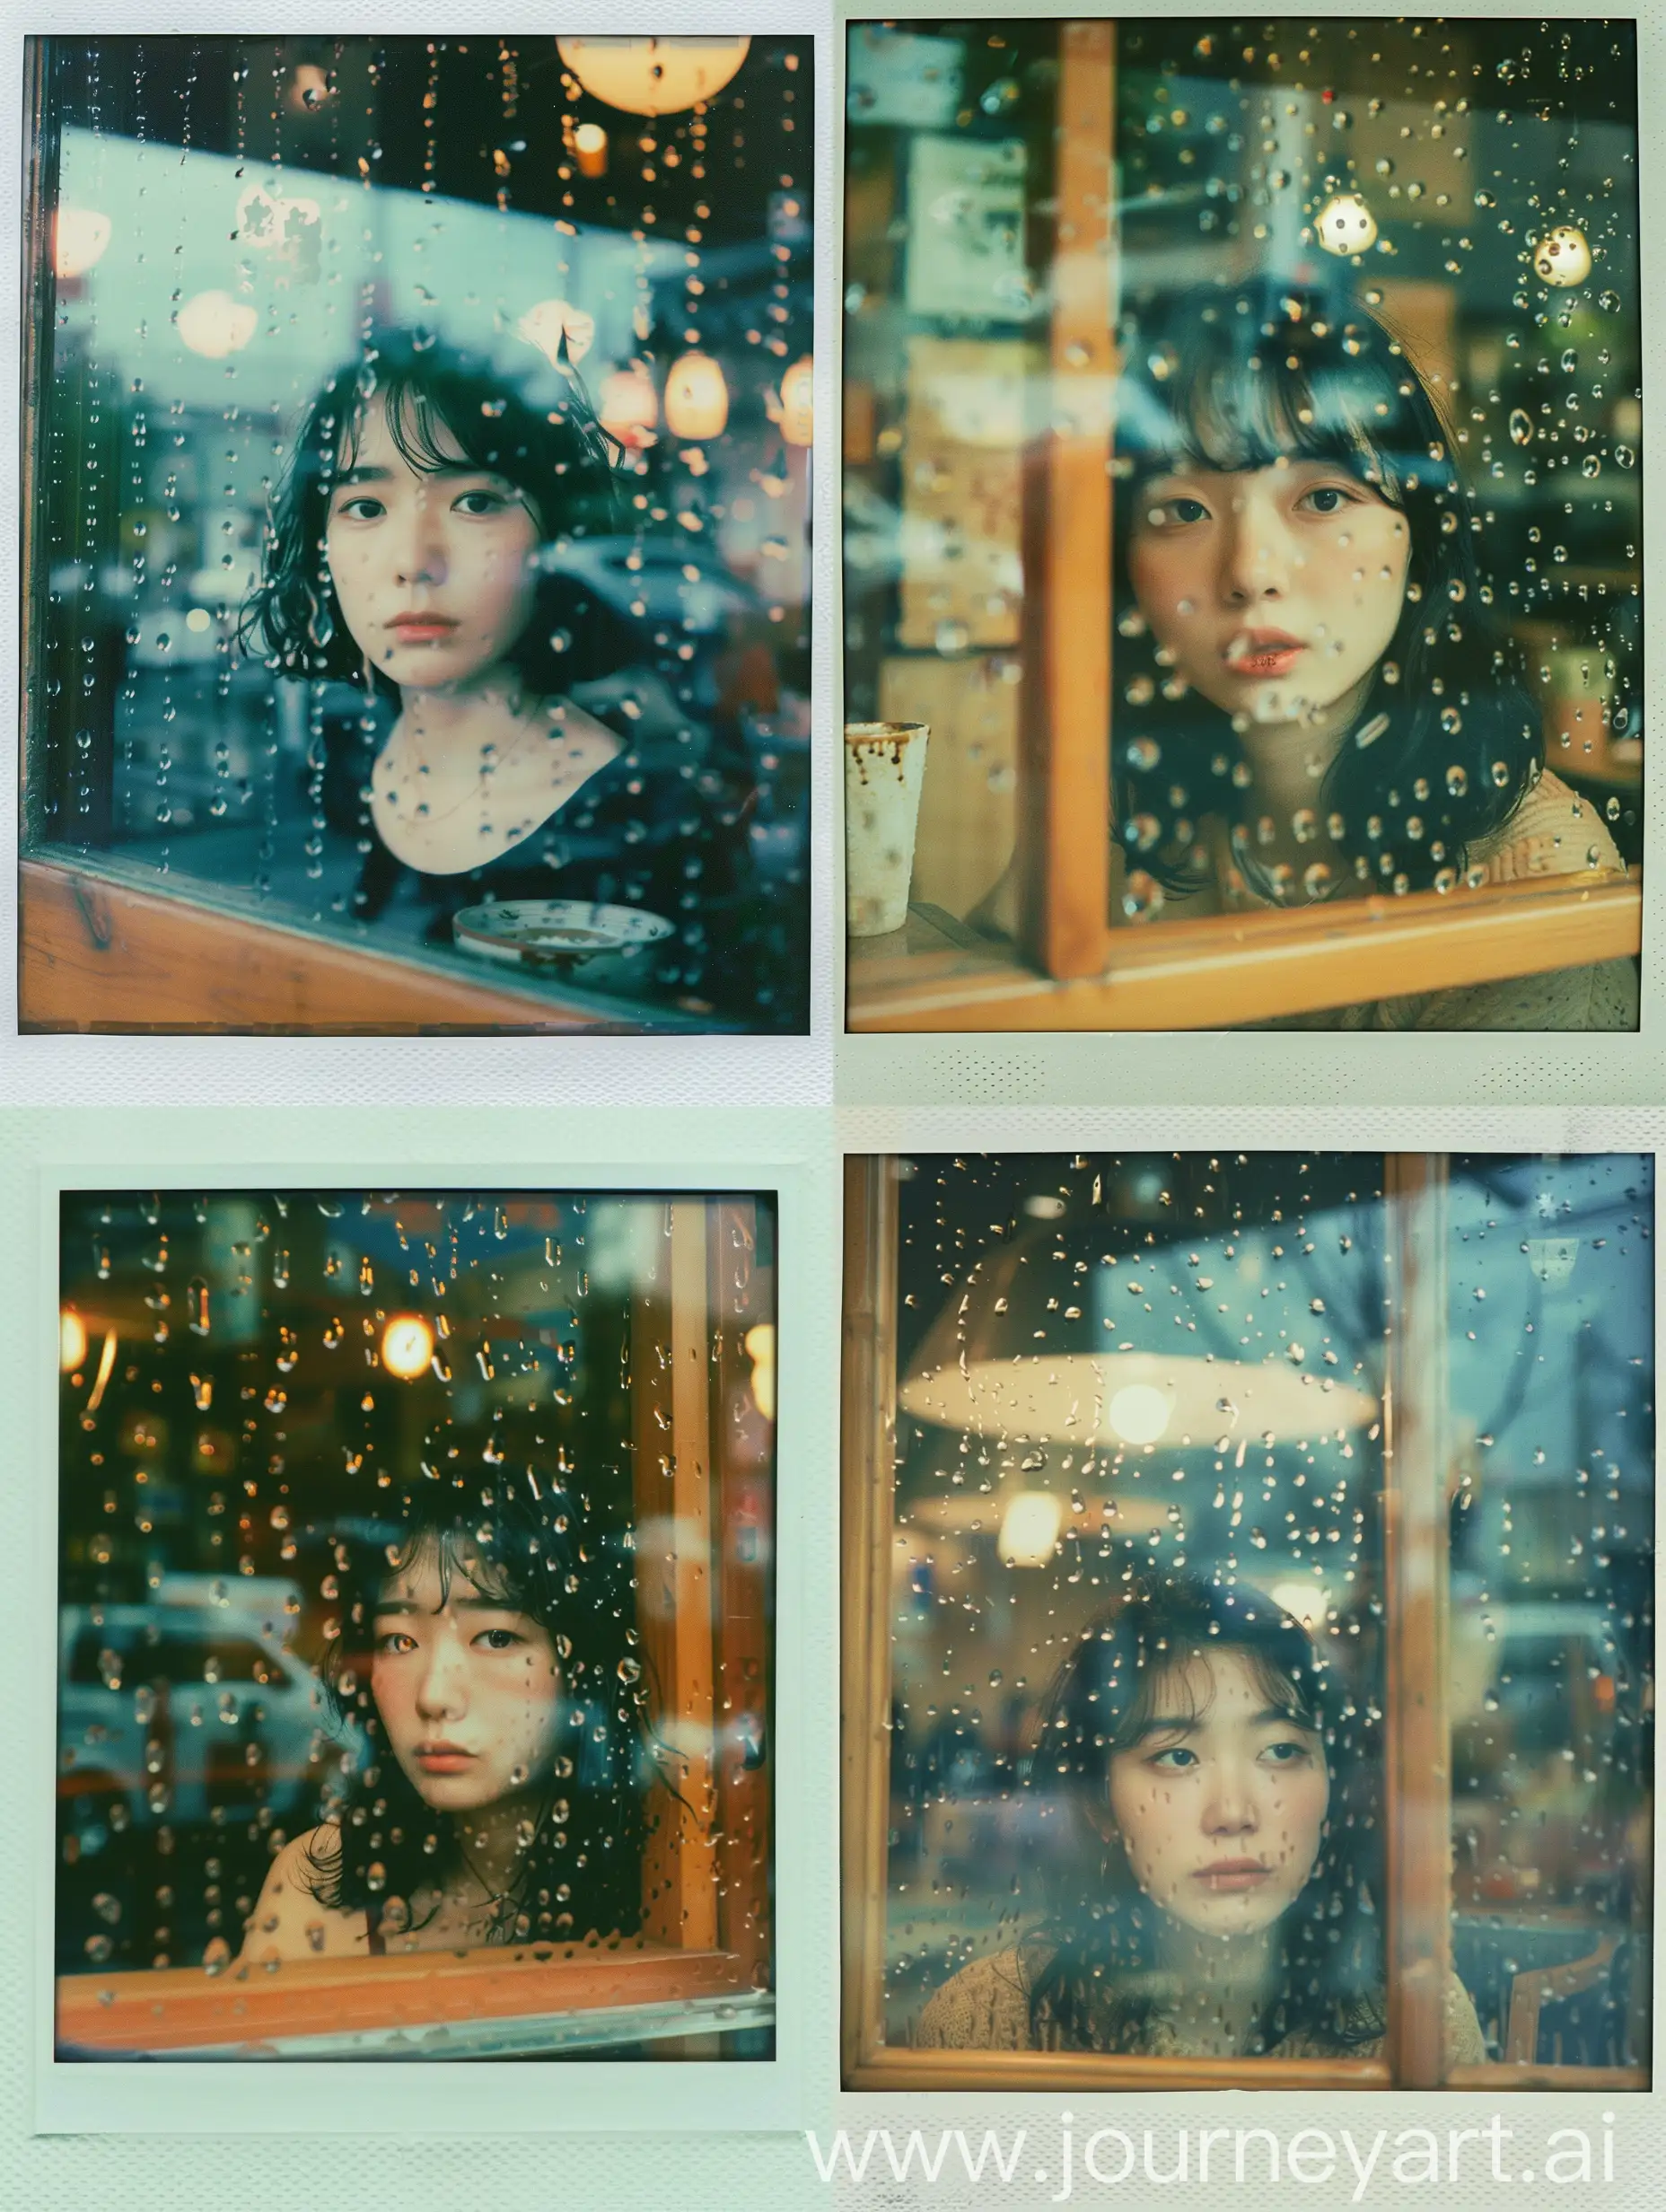 wide angle polaroid photo of a asian woman inside a cafe through a window. many raindrops on the window and very strong reflections on the window. she look far outside blankly. calm nostalgic atmosphere. film grain. kodak portra 800 film. 